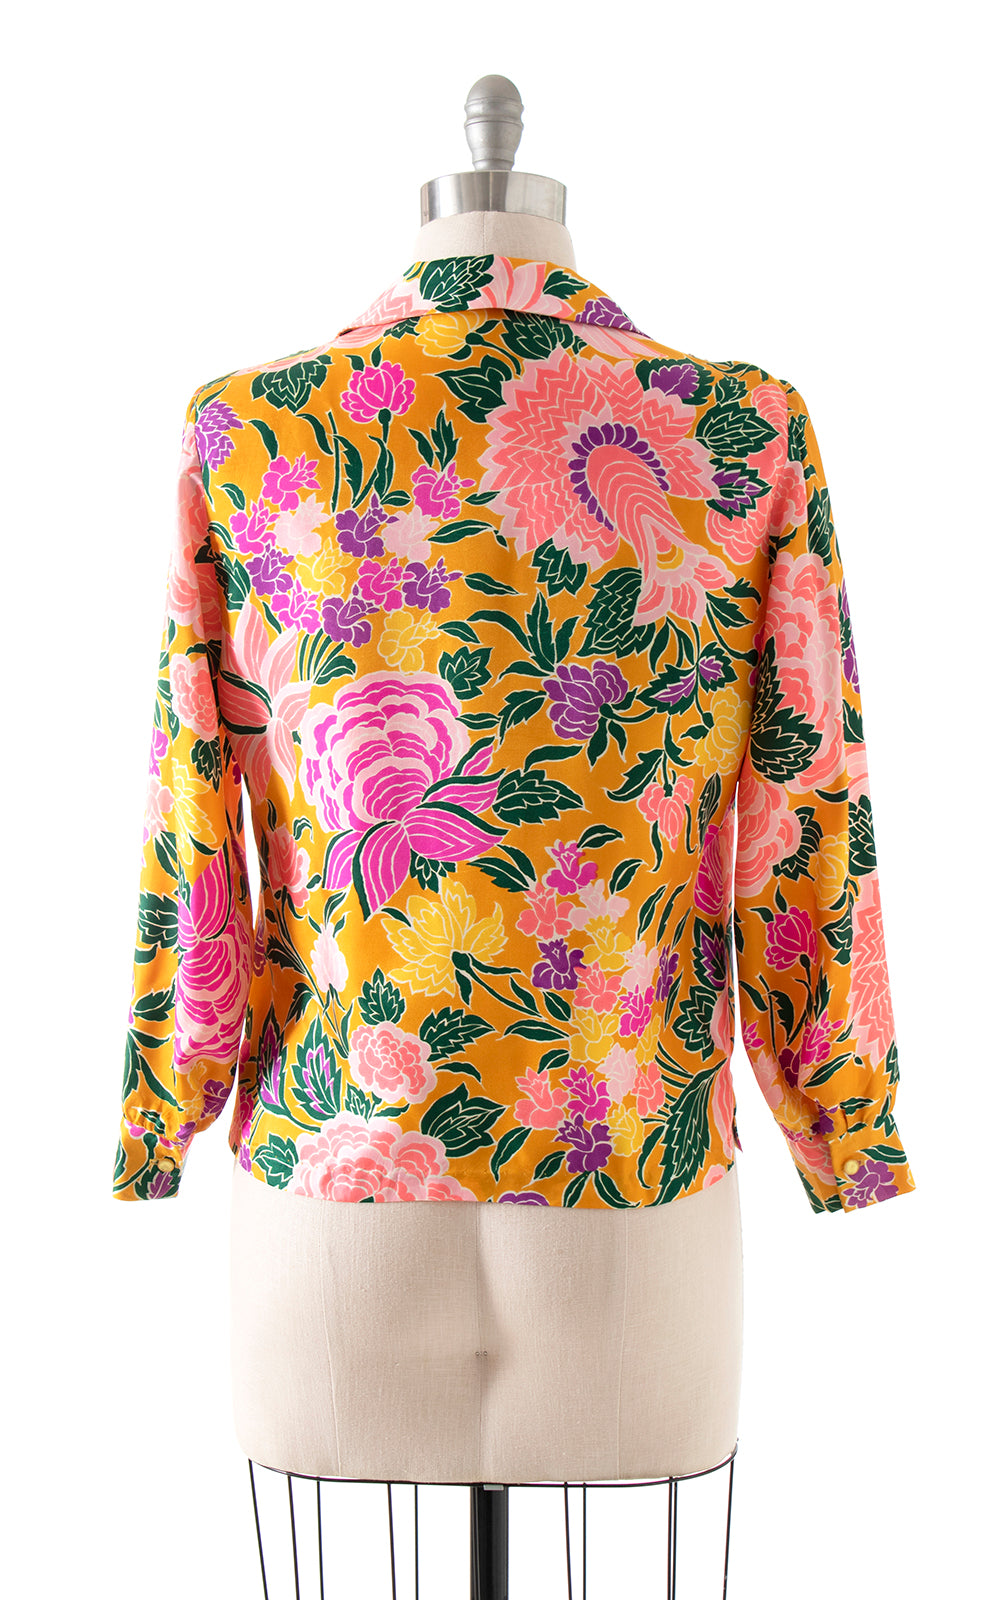 Vintage 1960s 60s 1970s 70s Bright Floral Printed Yellow Pink Button Up Long Sleeve Blouse Birthday Life Vintage